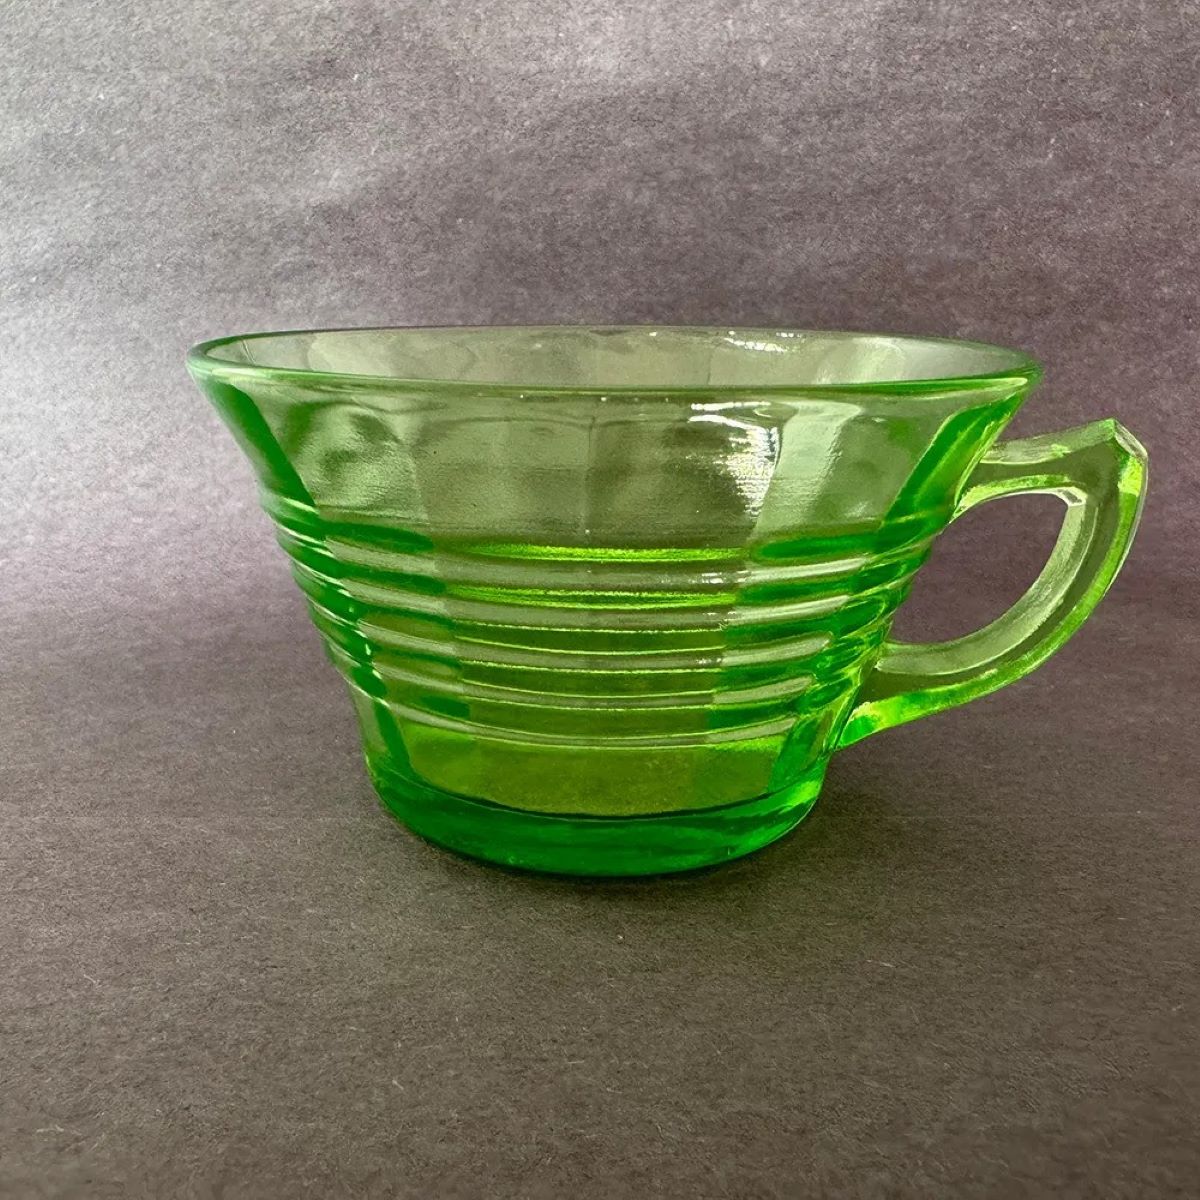 When Did They Stop Making Uranium Glass